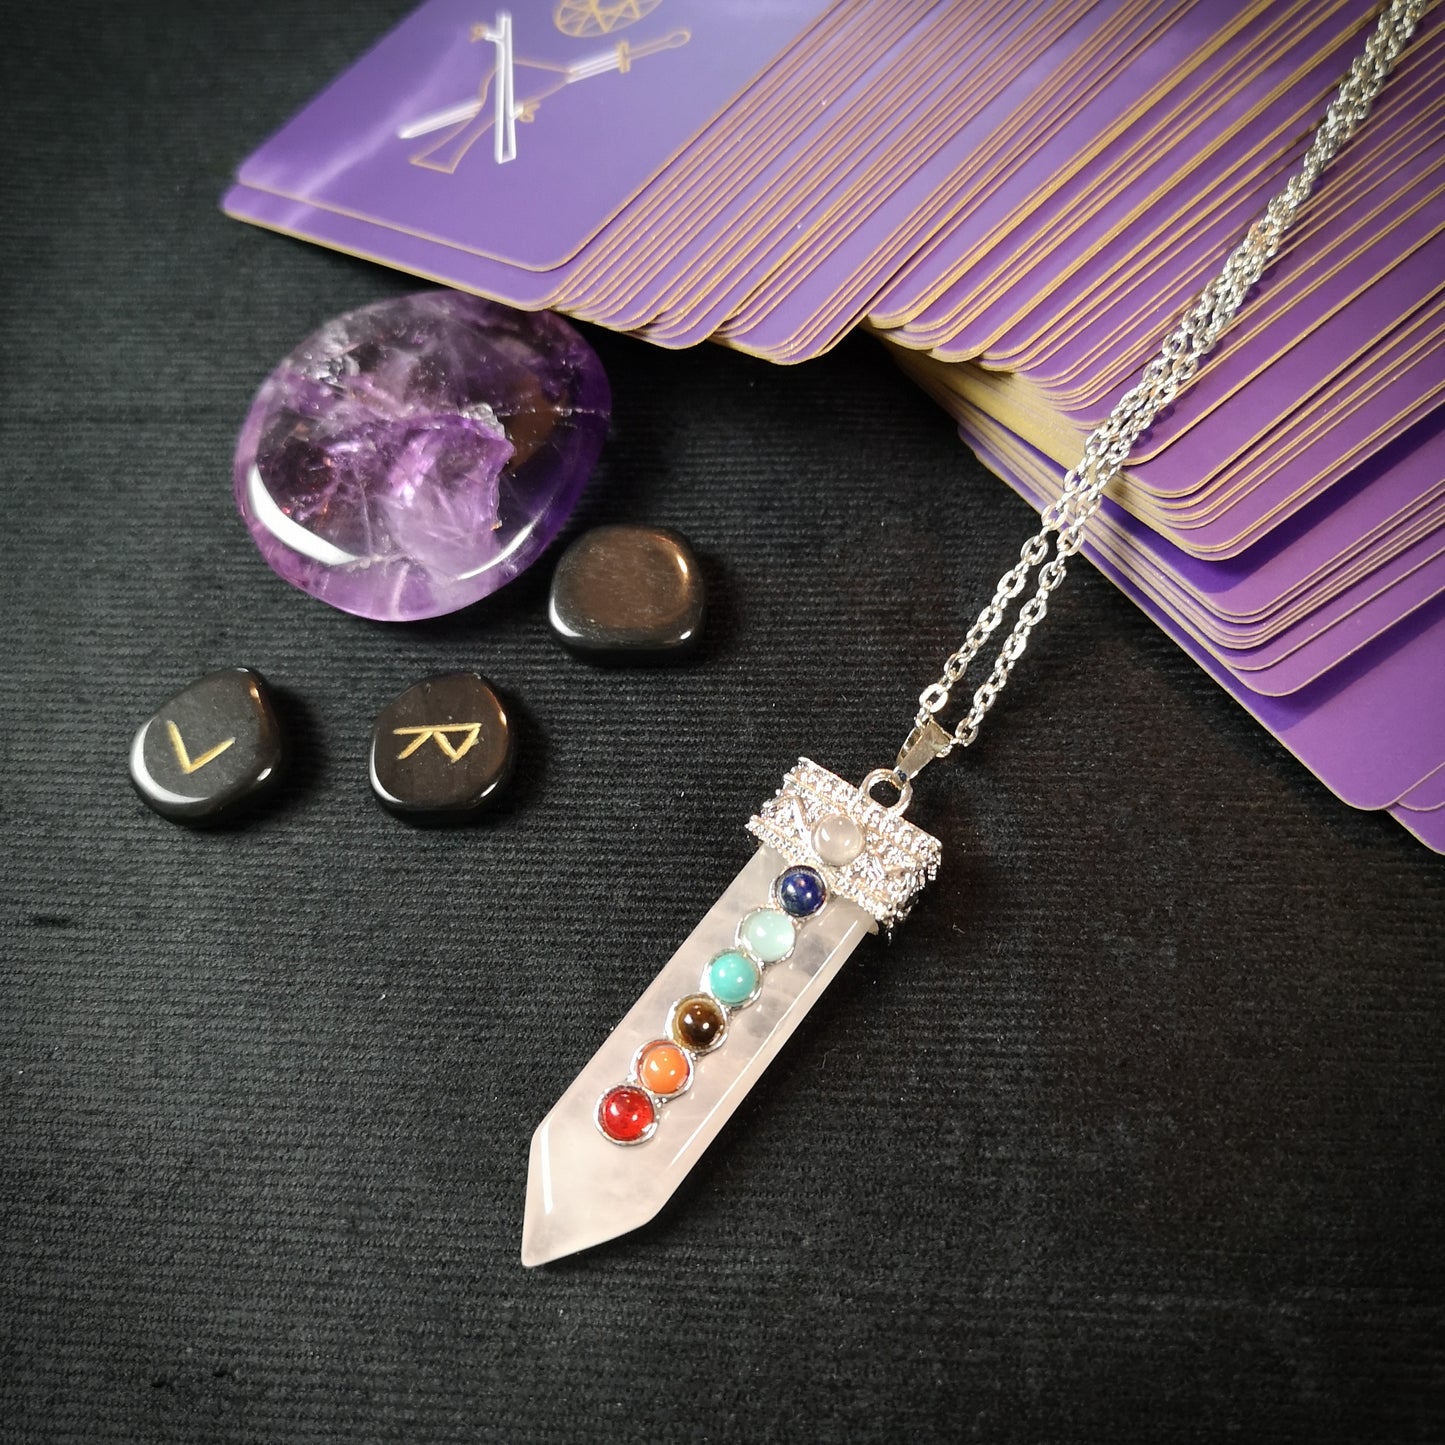 7 chakras rose quartz necklace - The French Witch shop